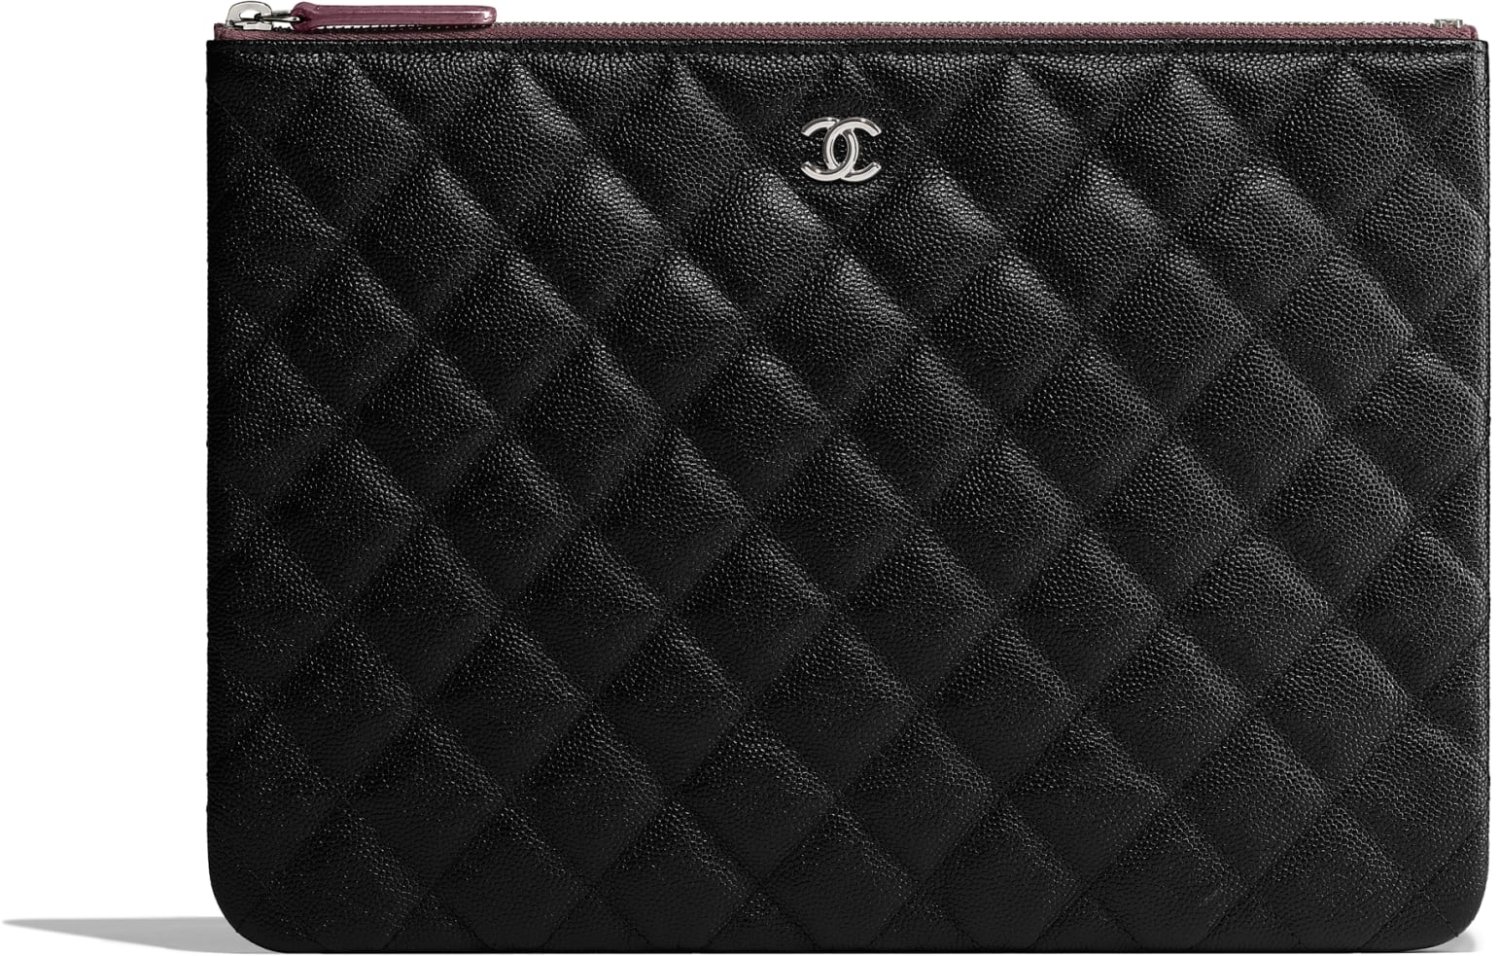 The So Many Chanel O Cases